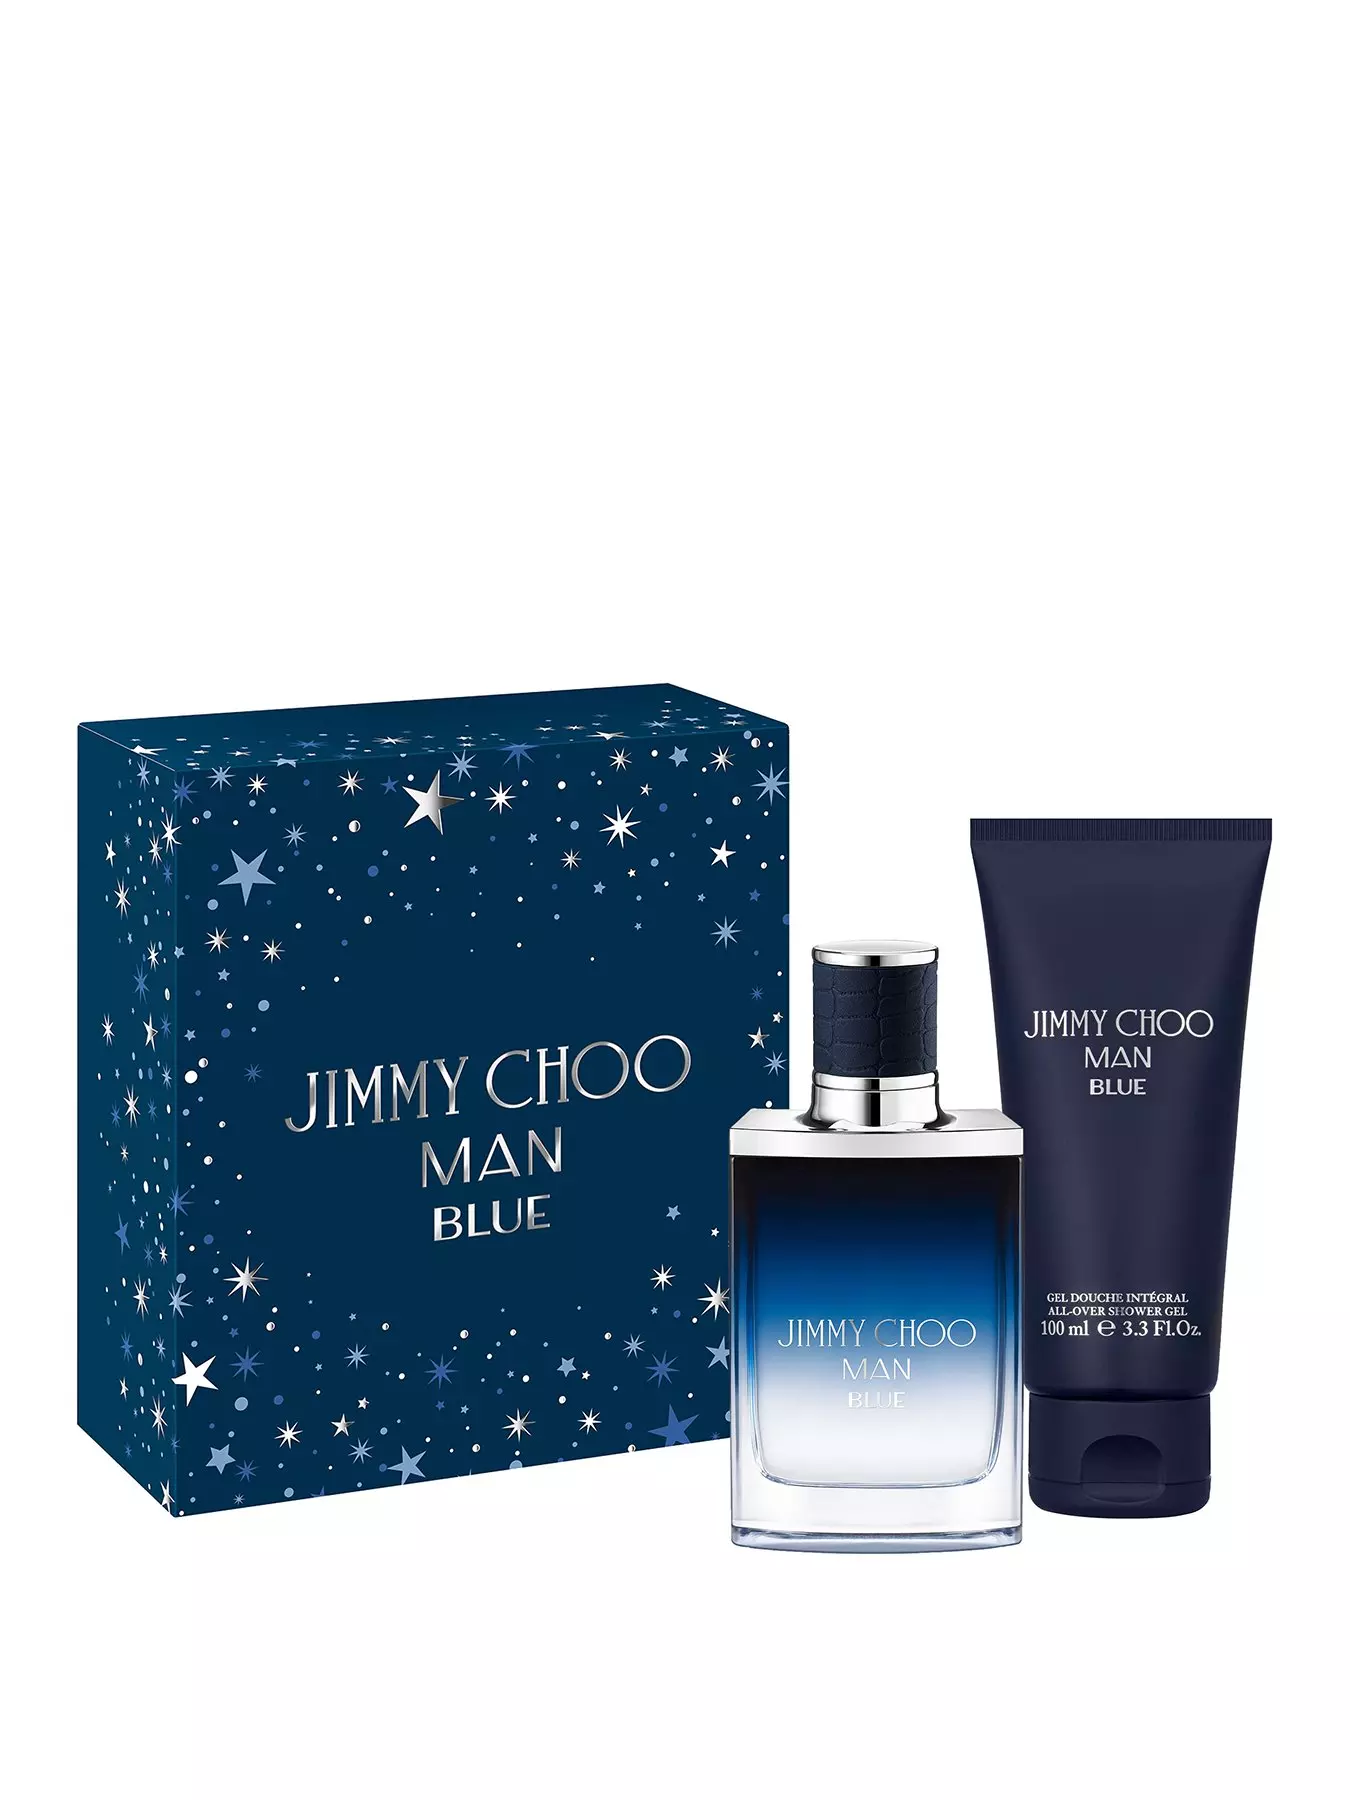 Our Impression of Jimmy Choo Man Blue by Jimmy Choo-Perfume-Oil-by